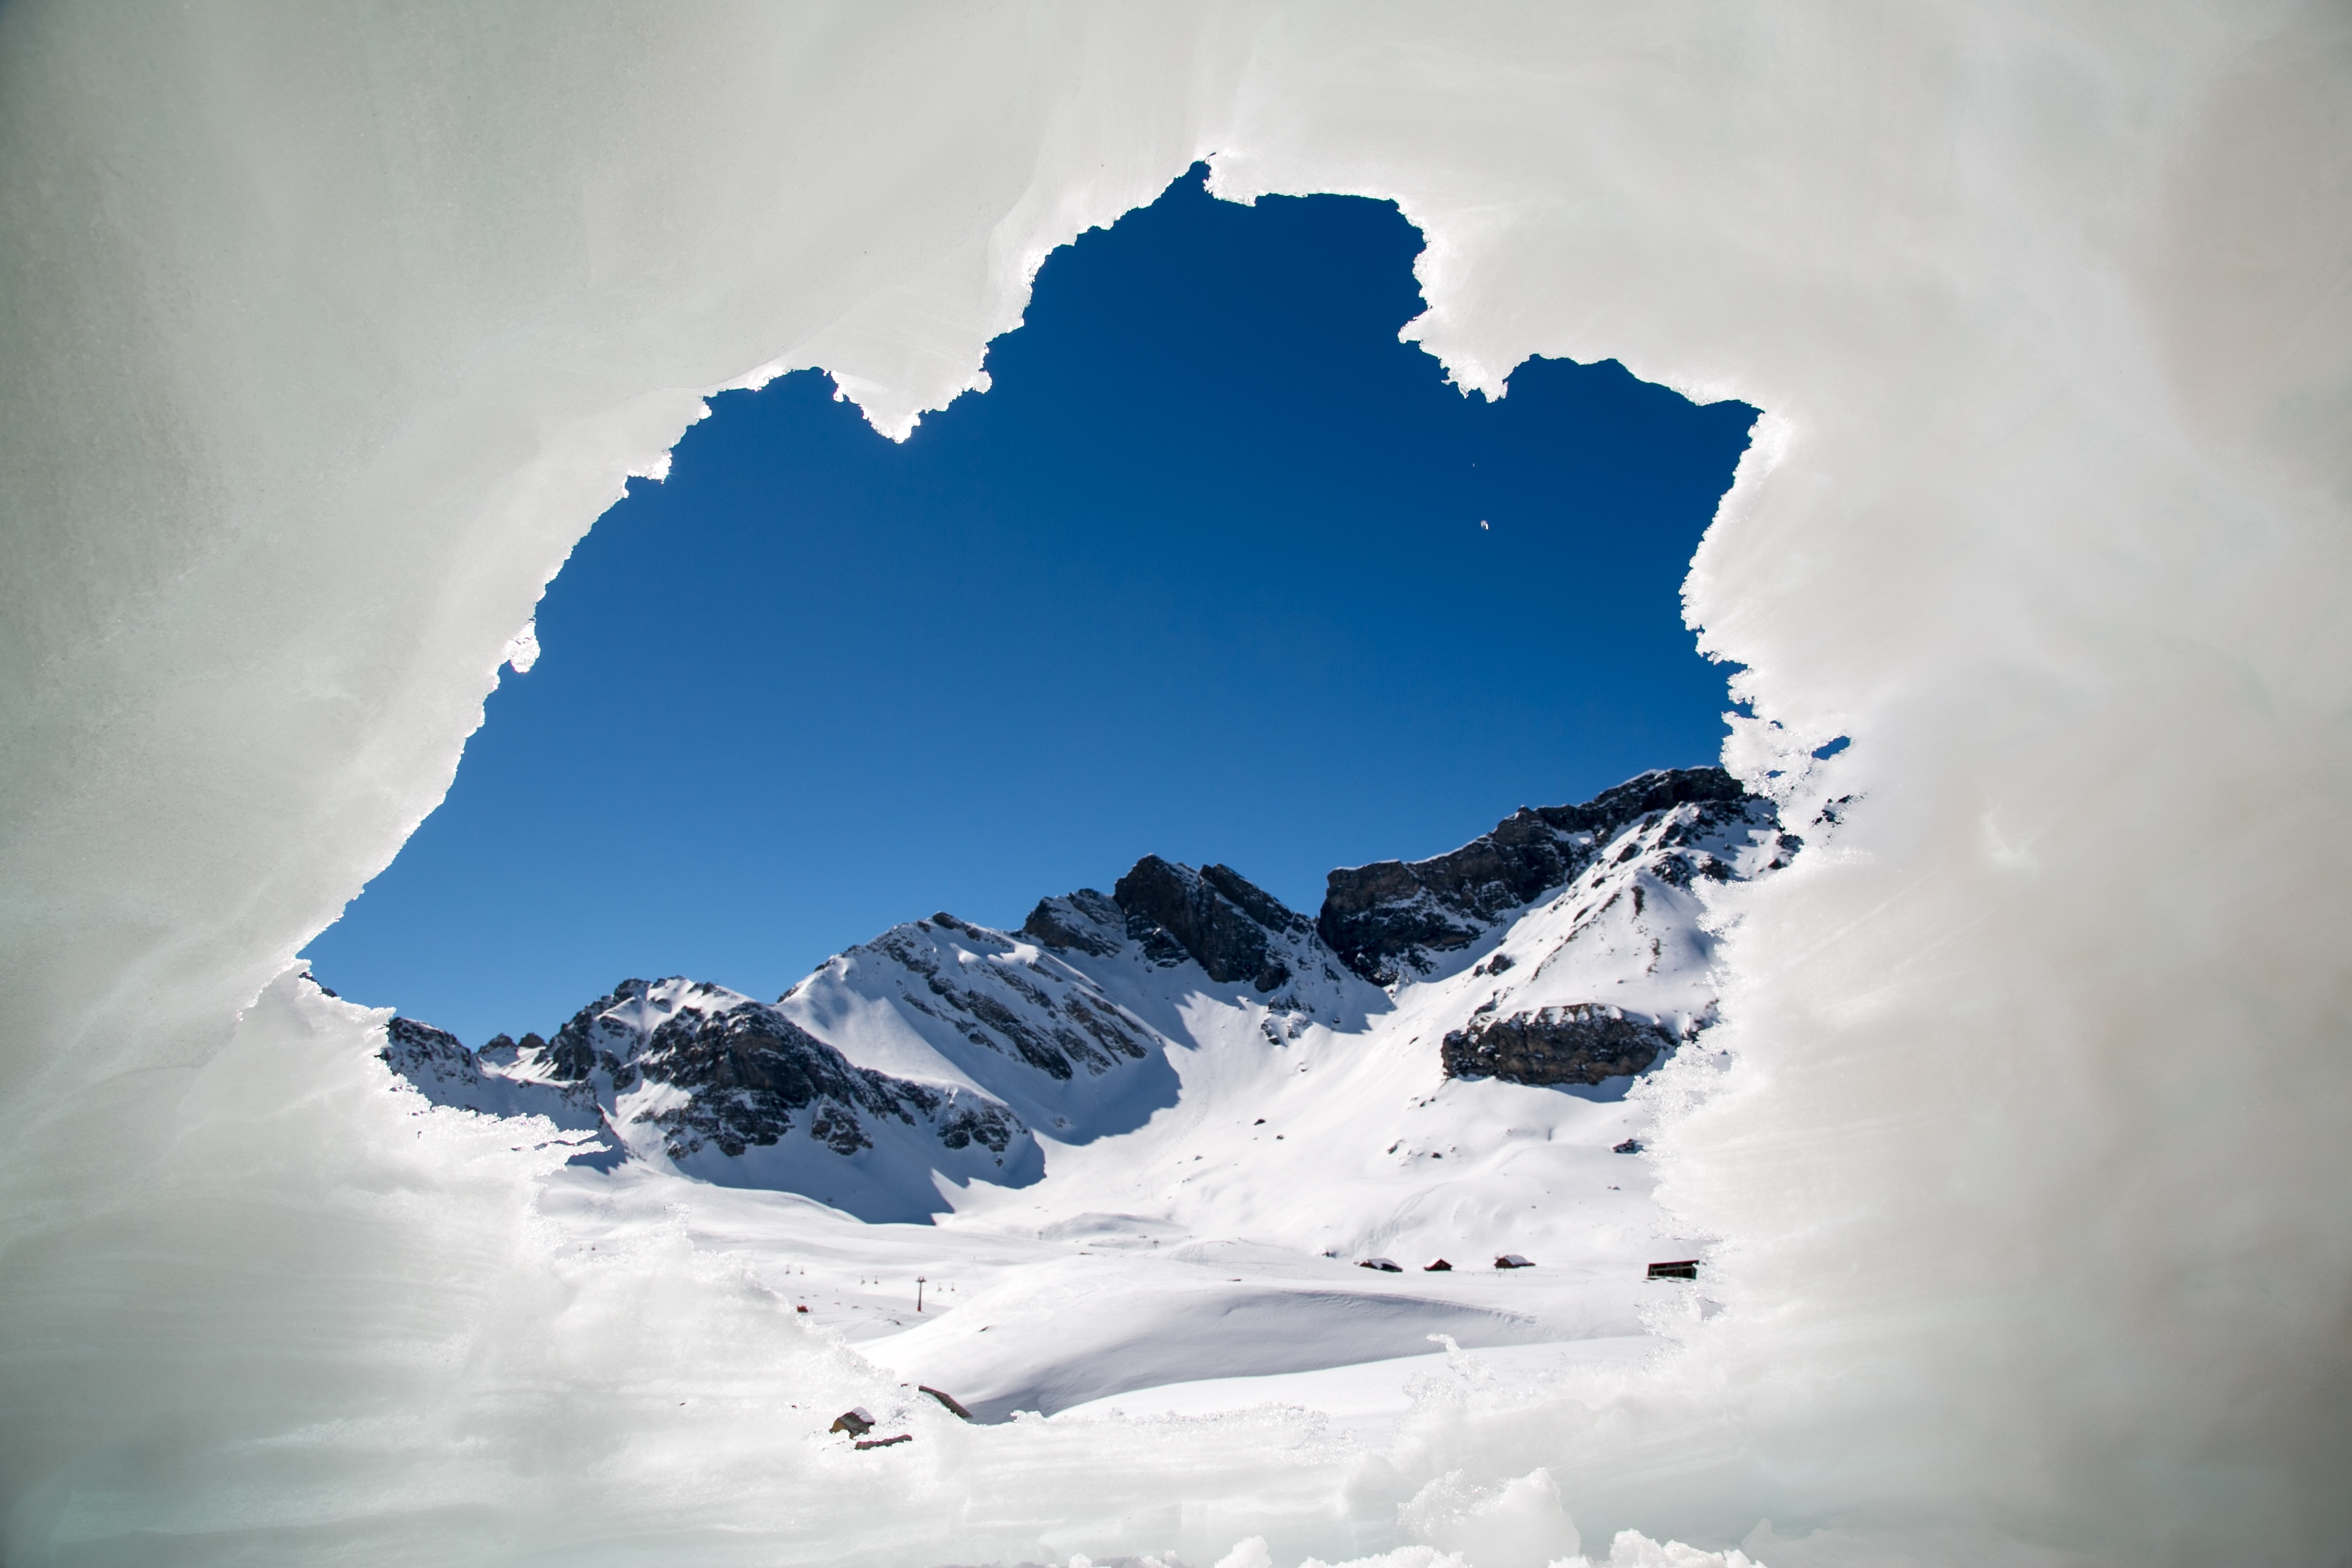 Looking through the opening of and ice hole in the  Switzerland Alps by rivella